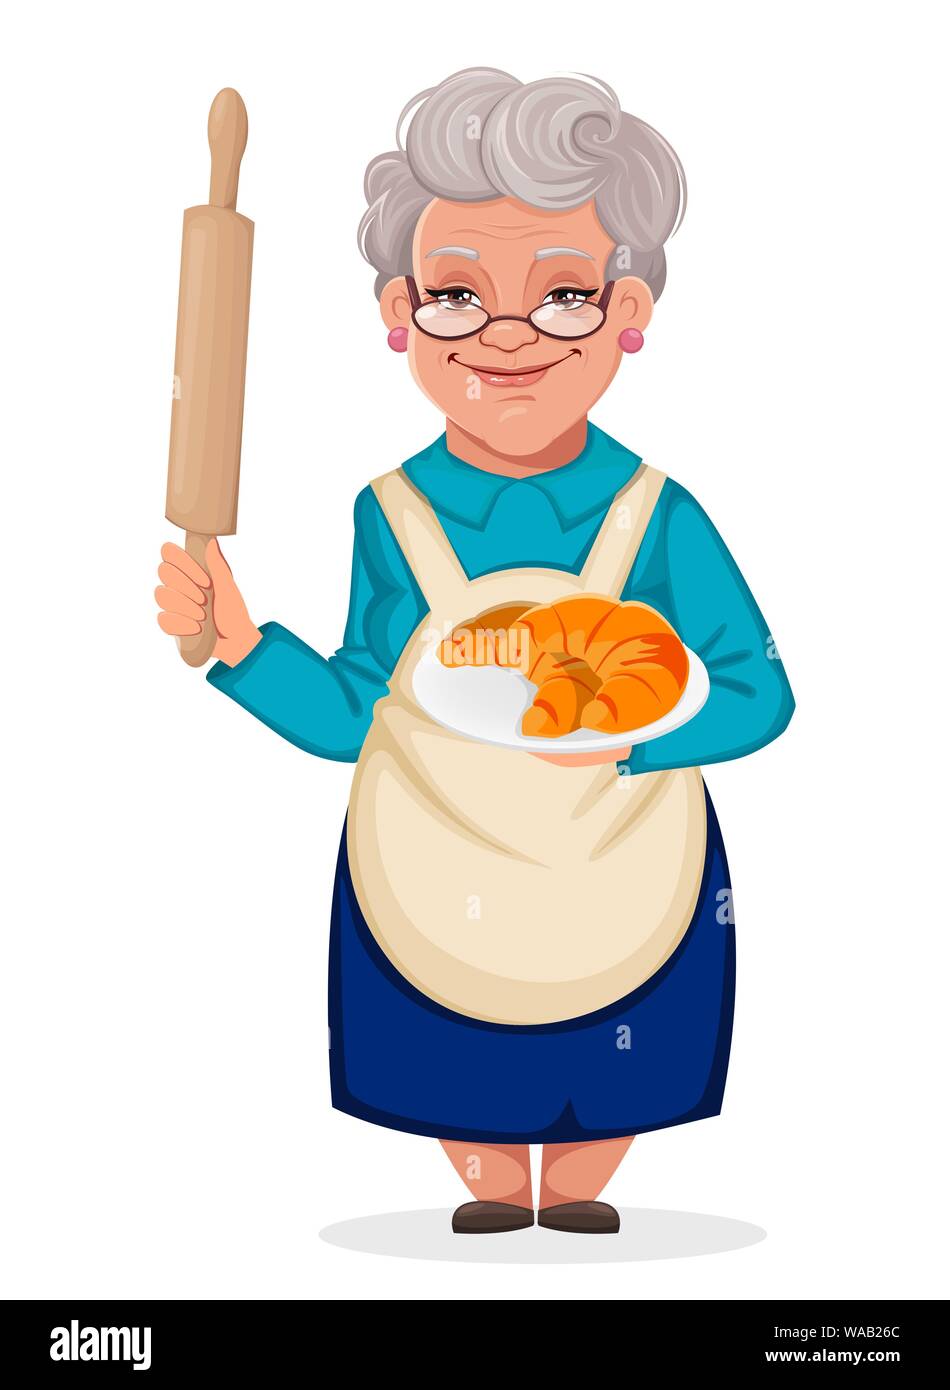 https://c8.alamy.com/comp/WAB26C/happy-grandparents-day-old-cute-woman-grandmother-holds-rolling-pin-vector-illustration-on-white-background-WAB26C.jpg